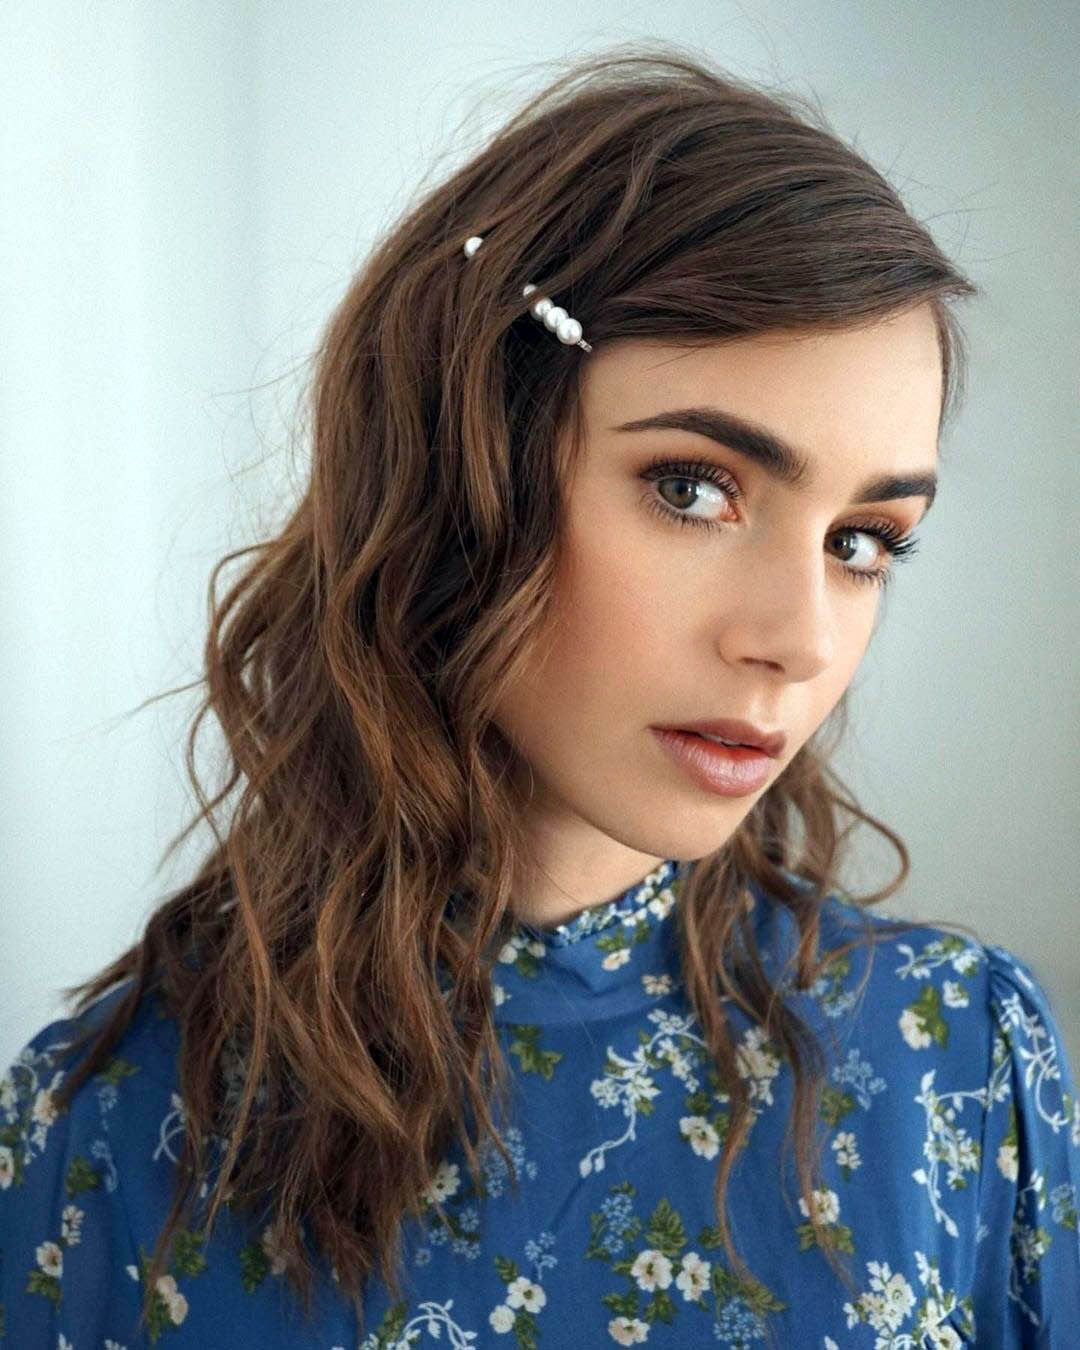 Lily Collins' Pinned Side Bangs